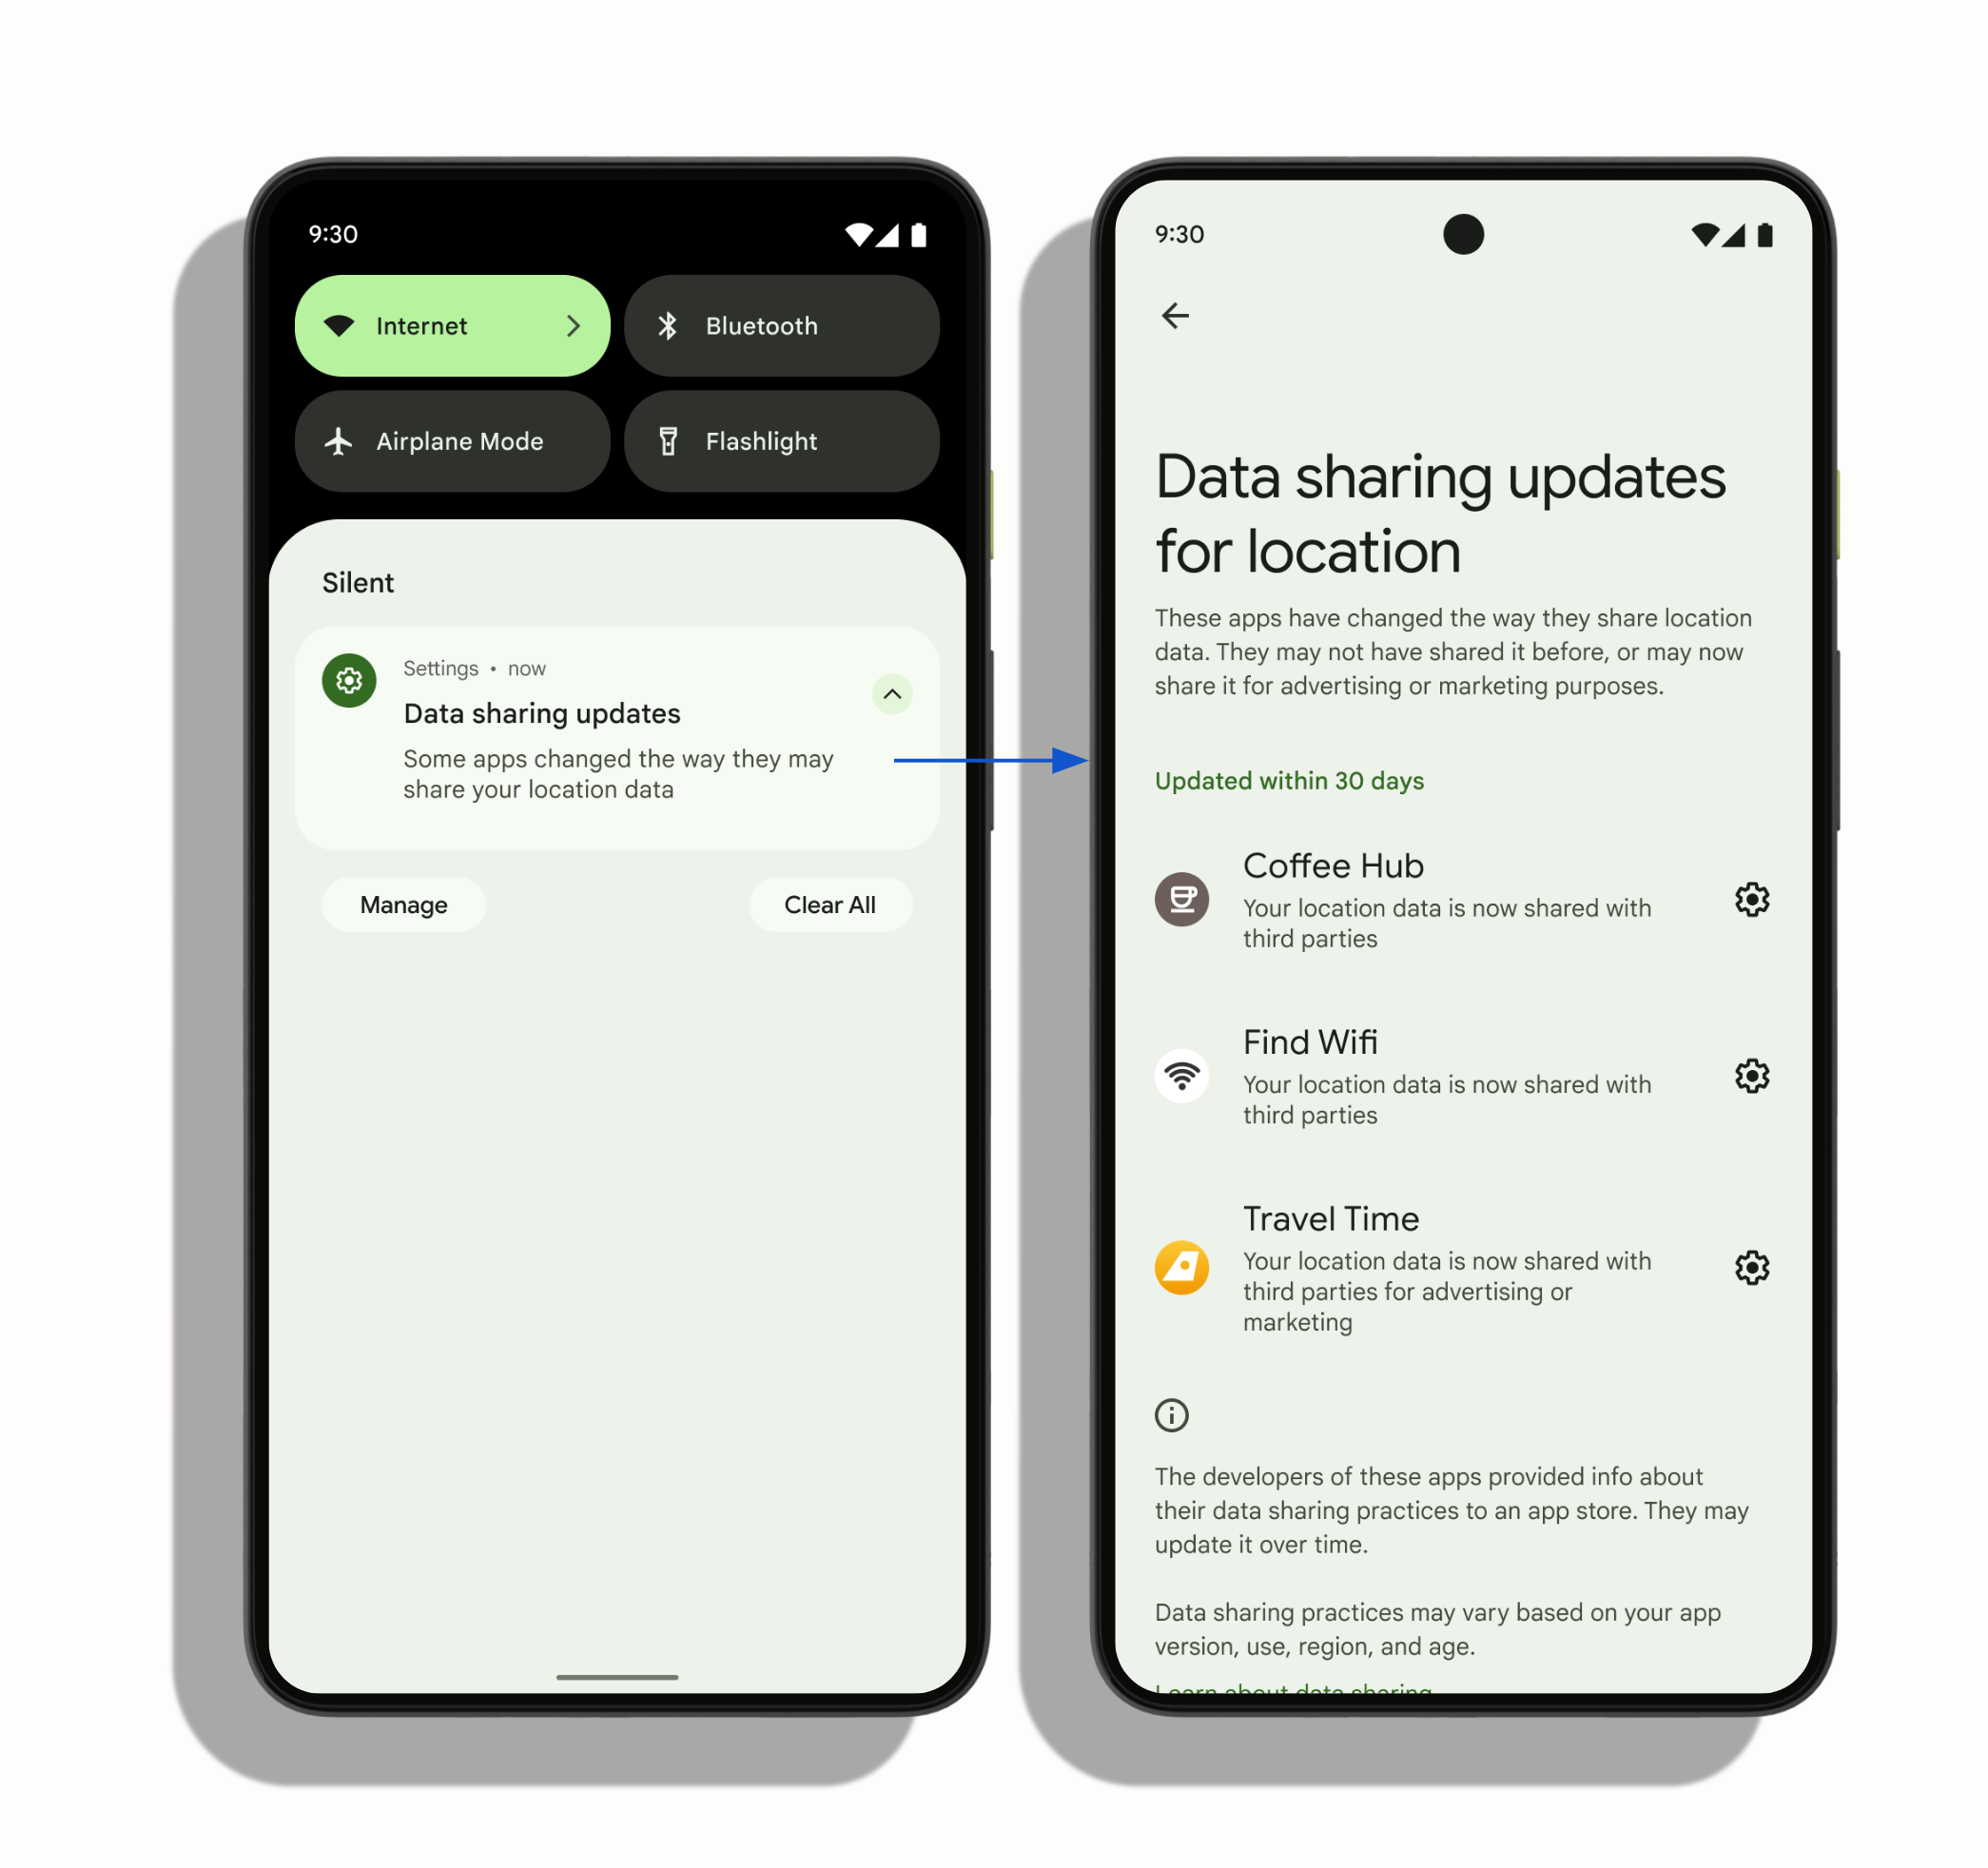 When the user taps anywhere on the system notification, the 'Data
       sharing updates for location' page loads in system settings. A list near
       the middle of the screen shows the apps that have changed their
       data-sharing practices